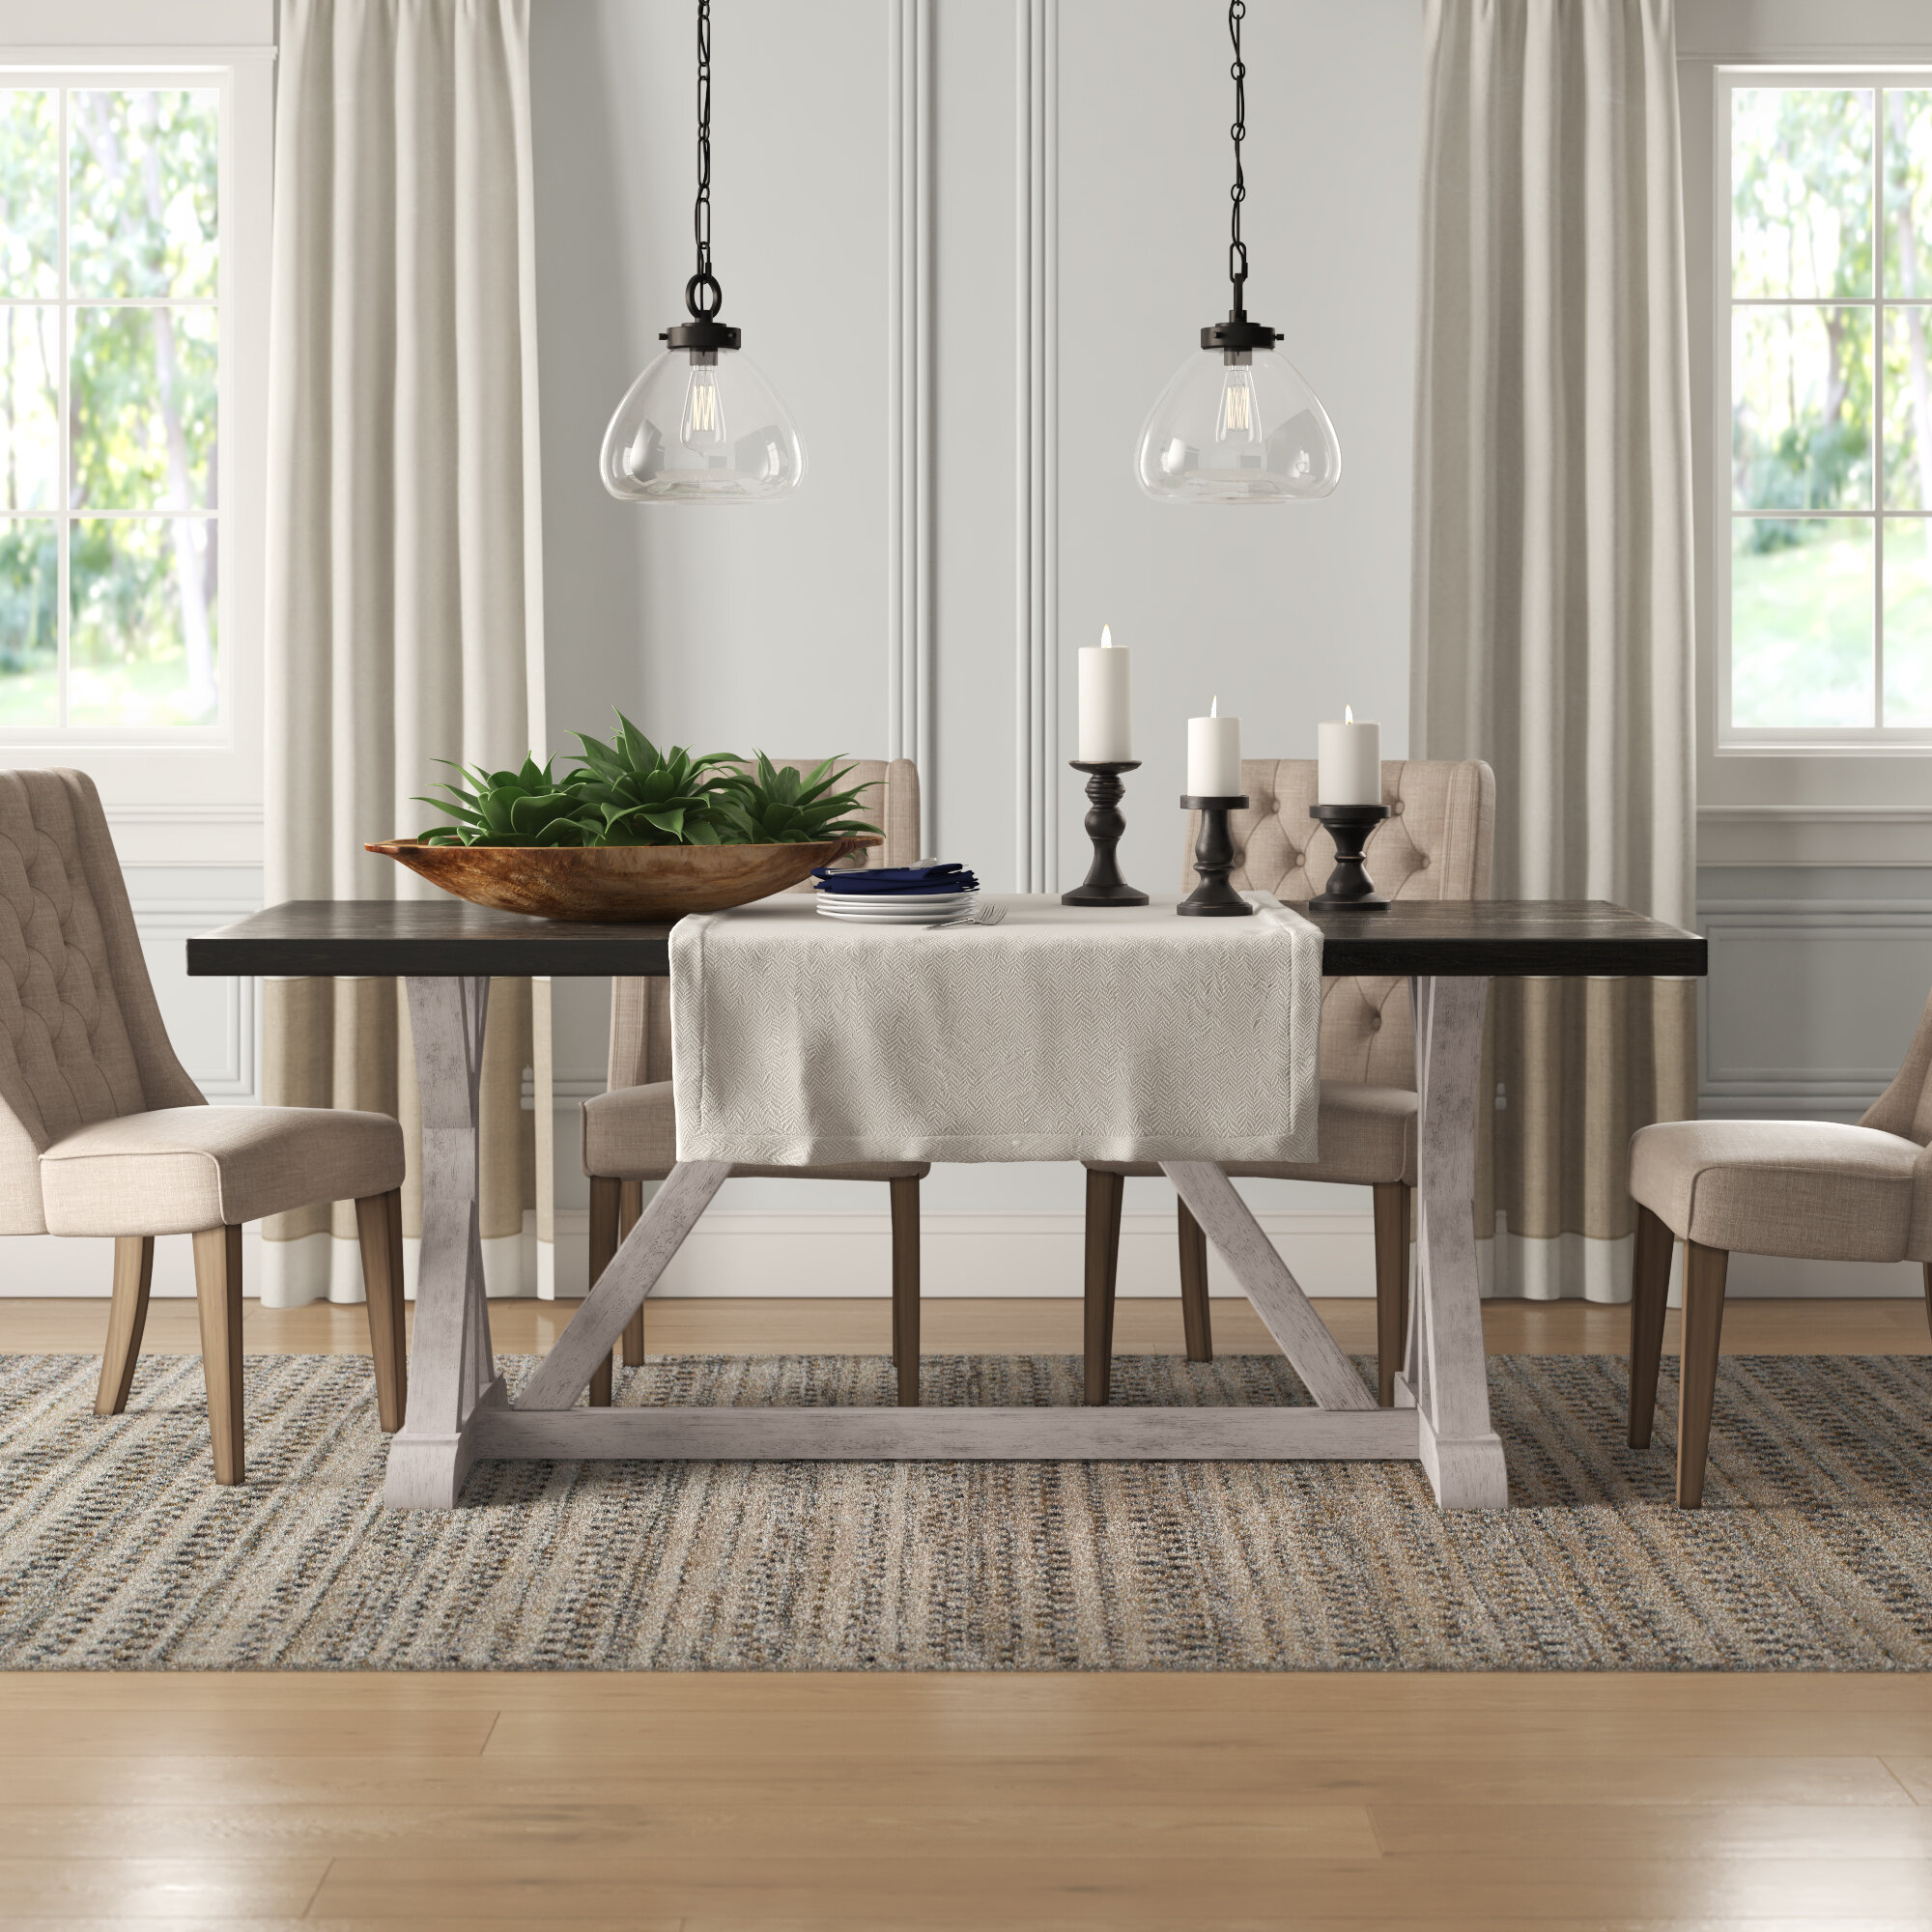 Hector Trestle Dining Table Reviews